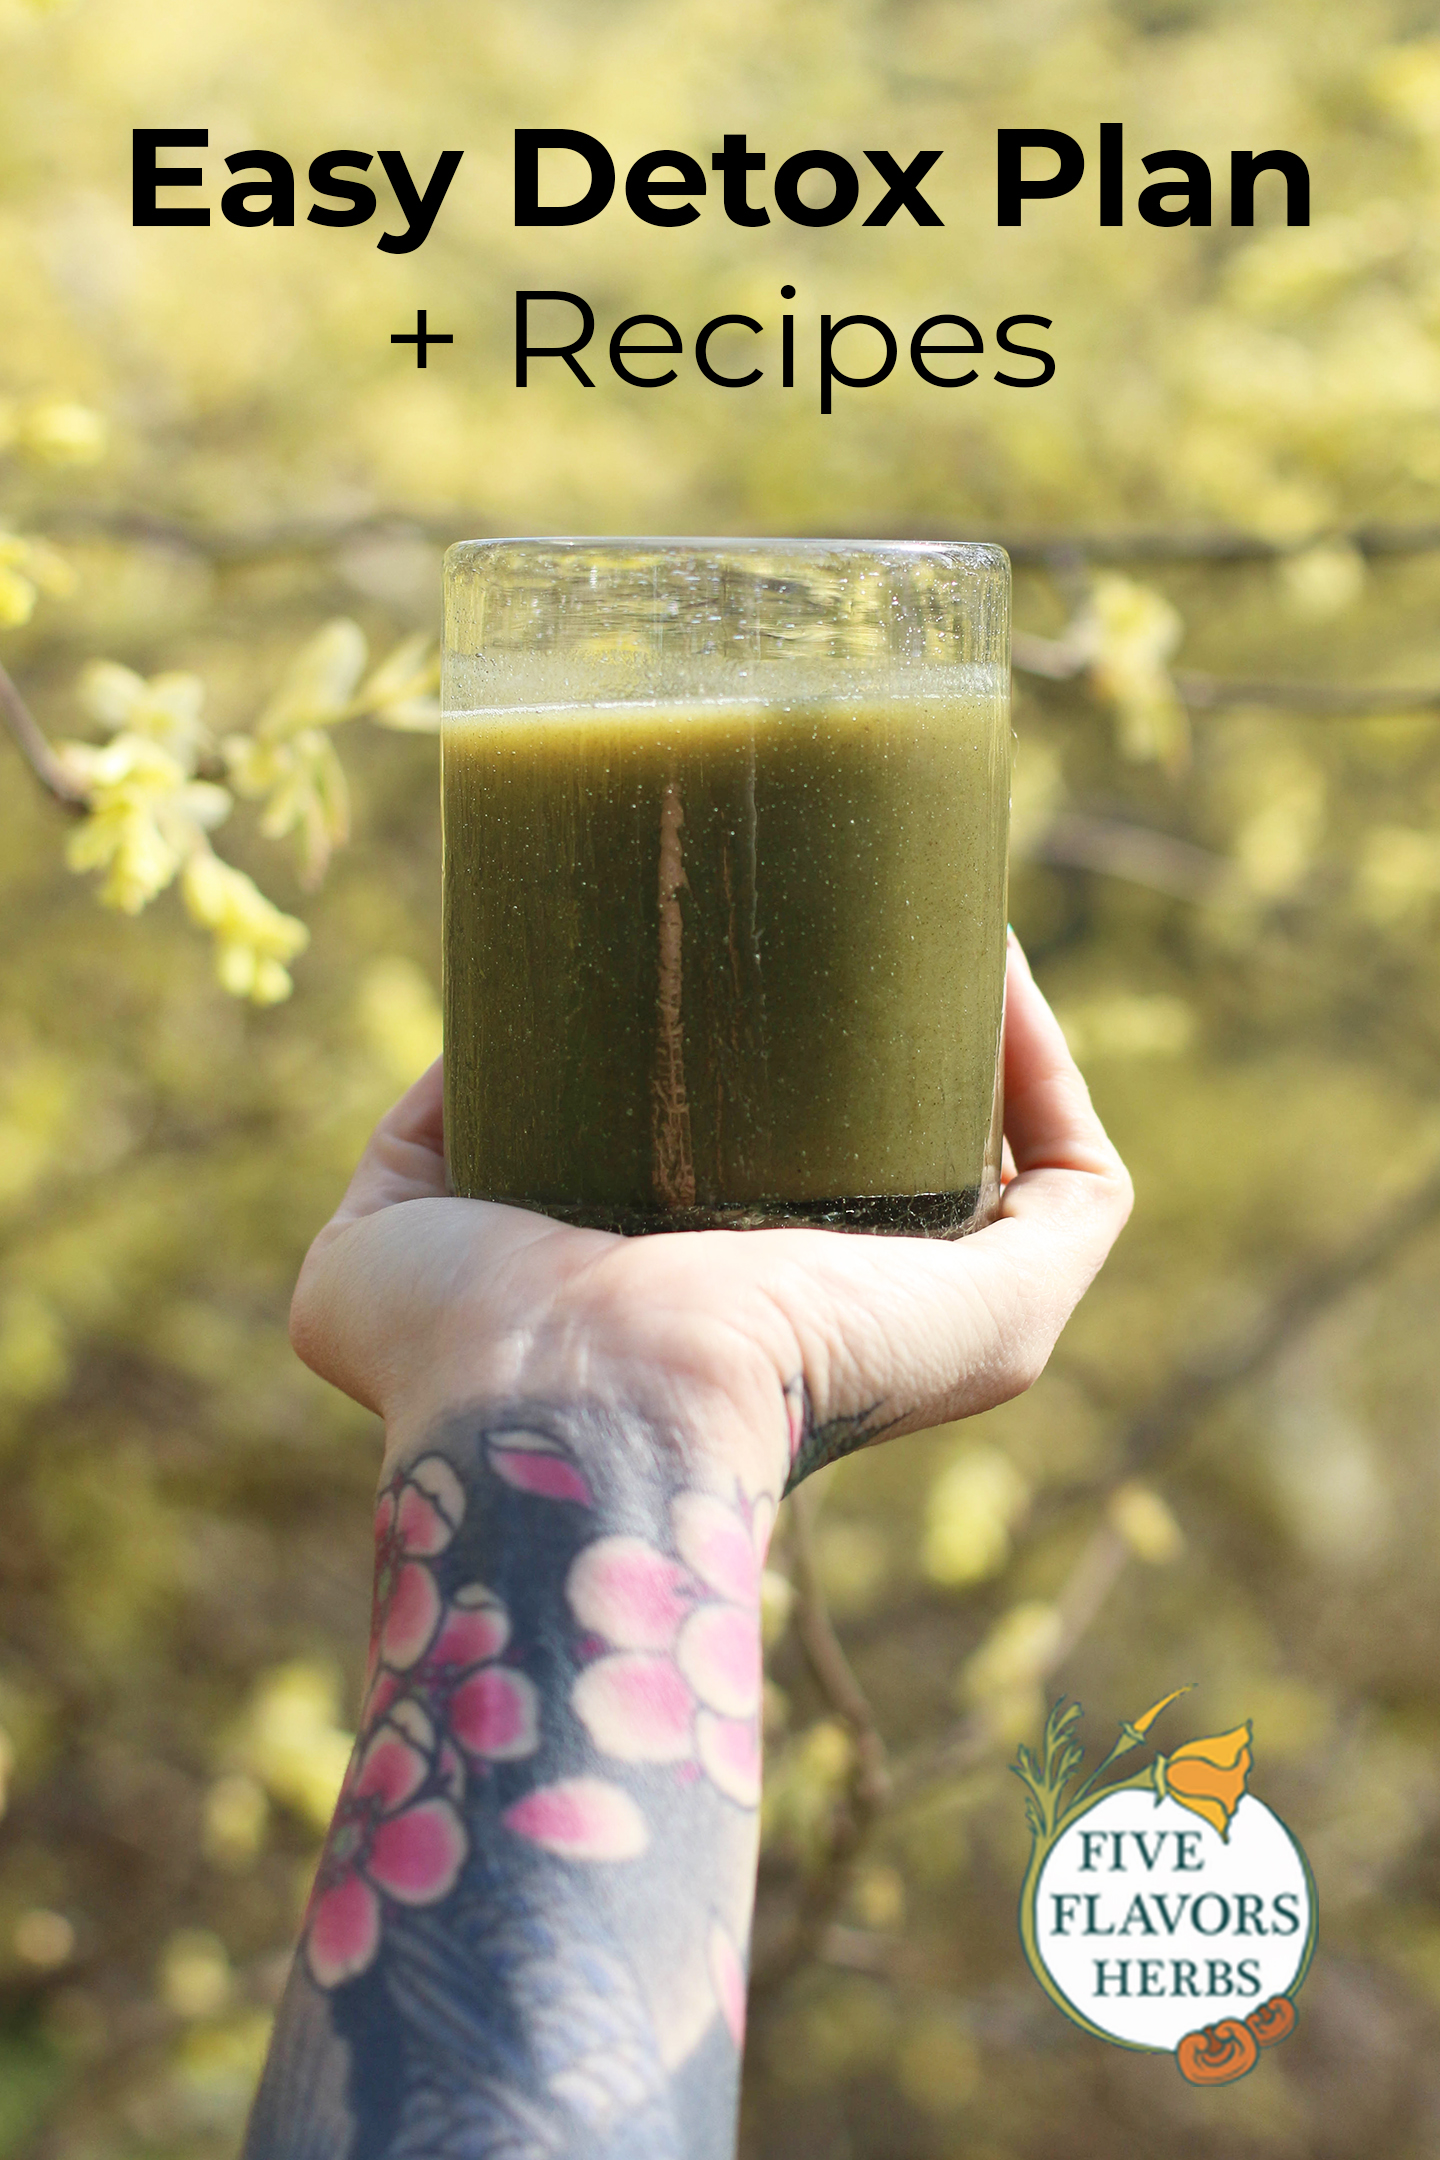 3-day-detox-plan-pin-with-tattooed-arm-holding-glass-of-green-juice